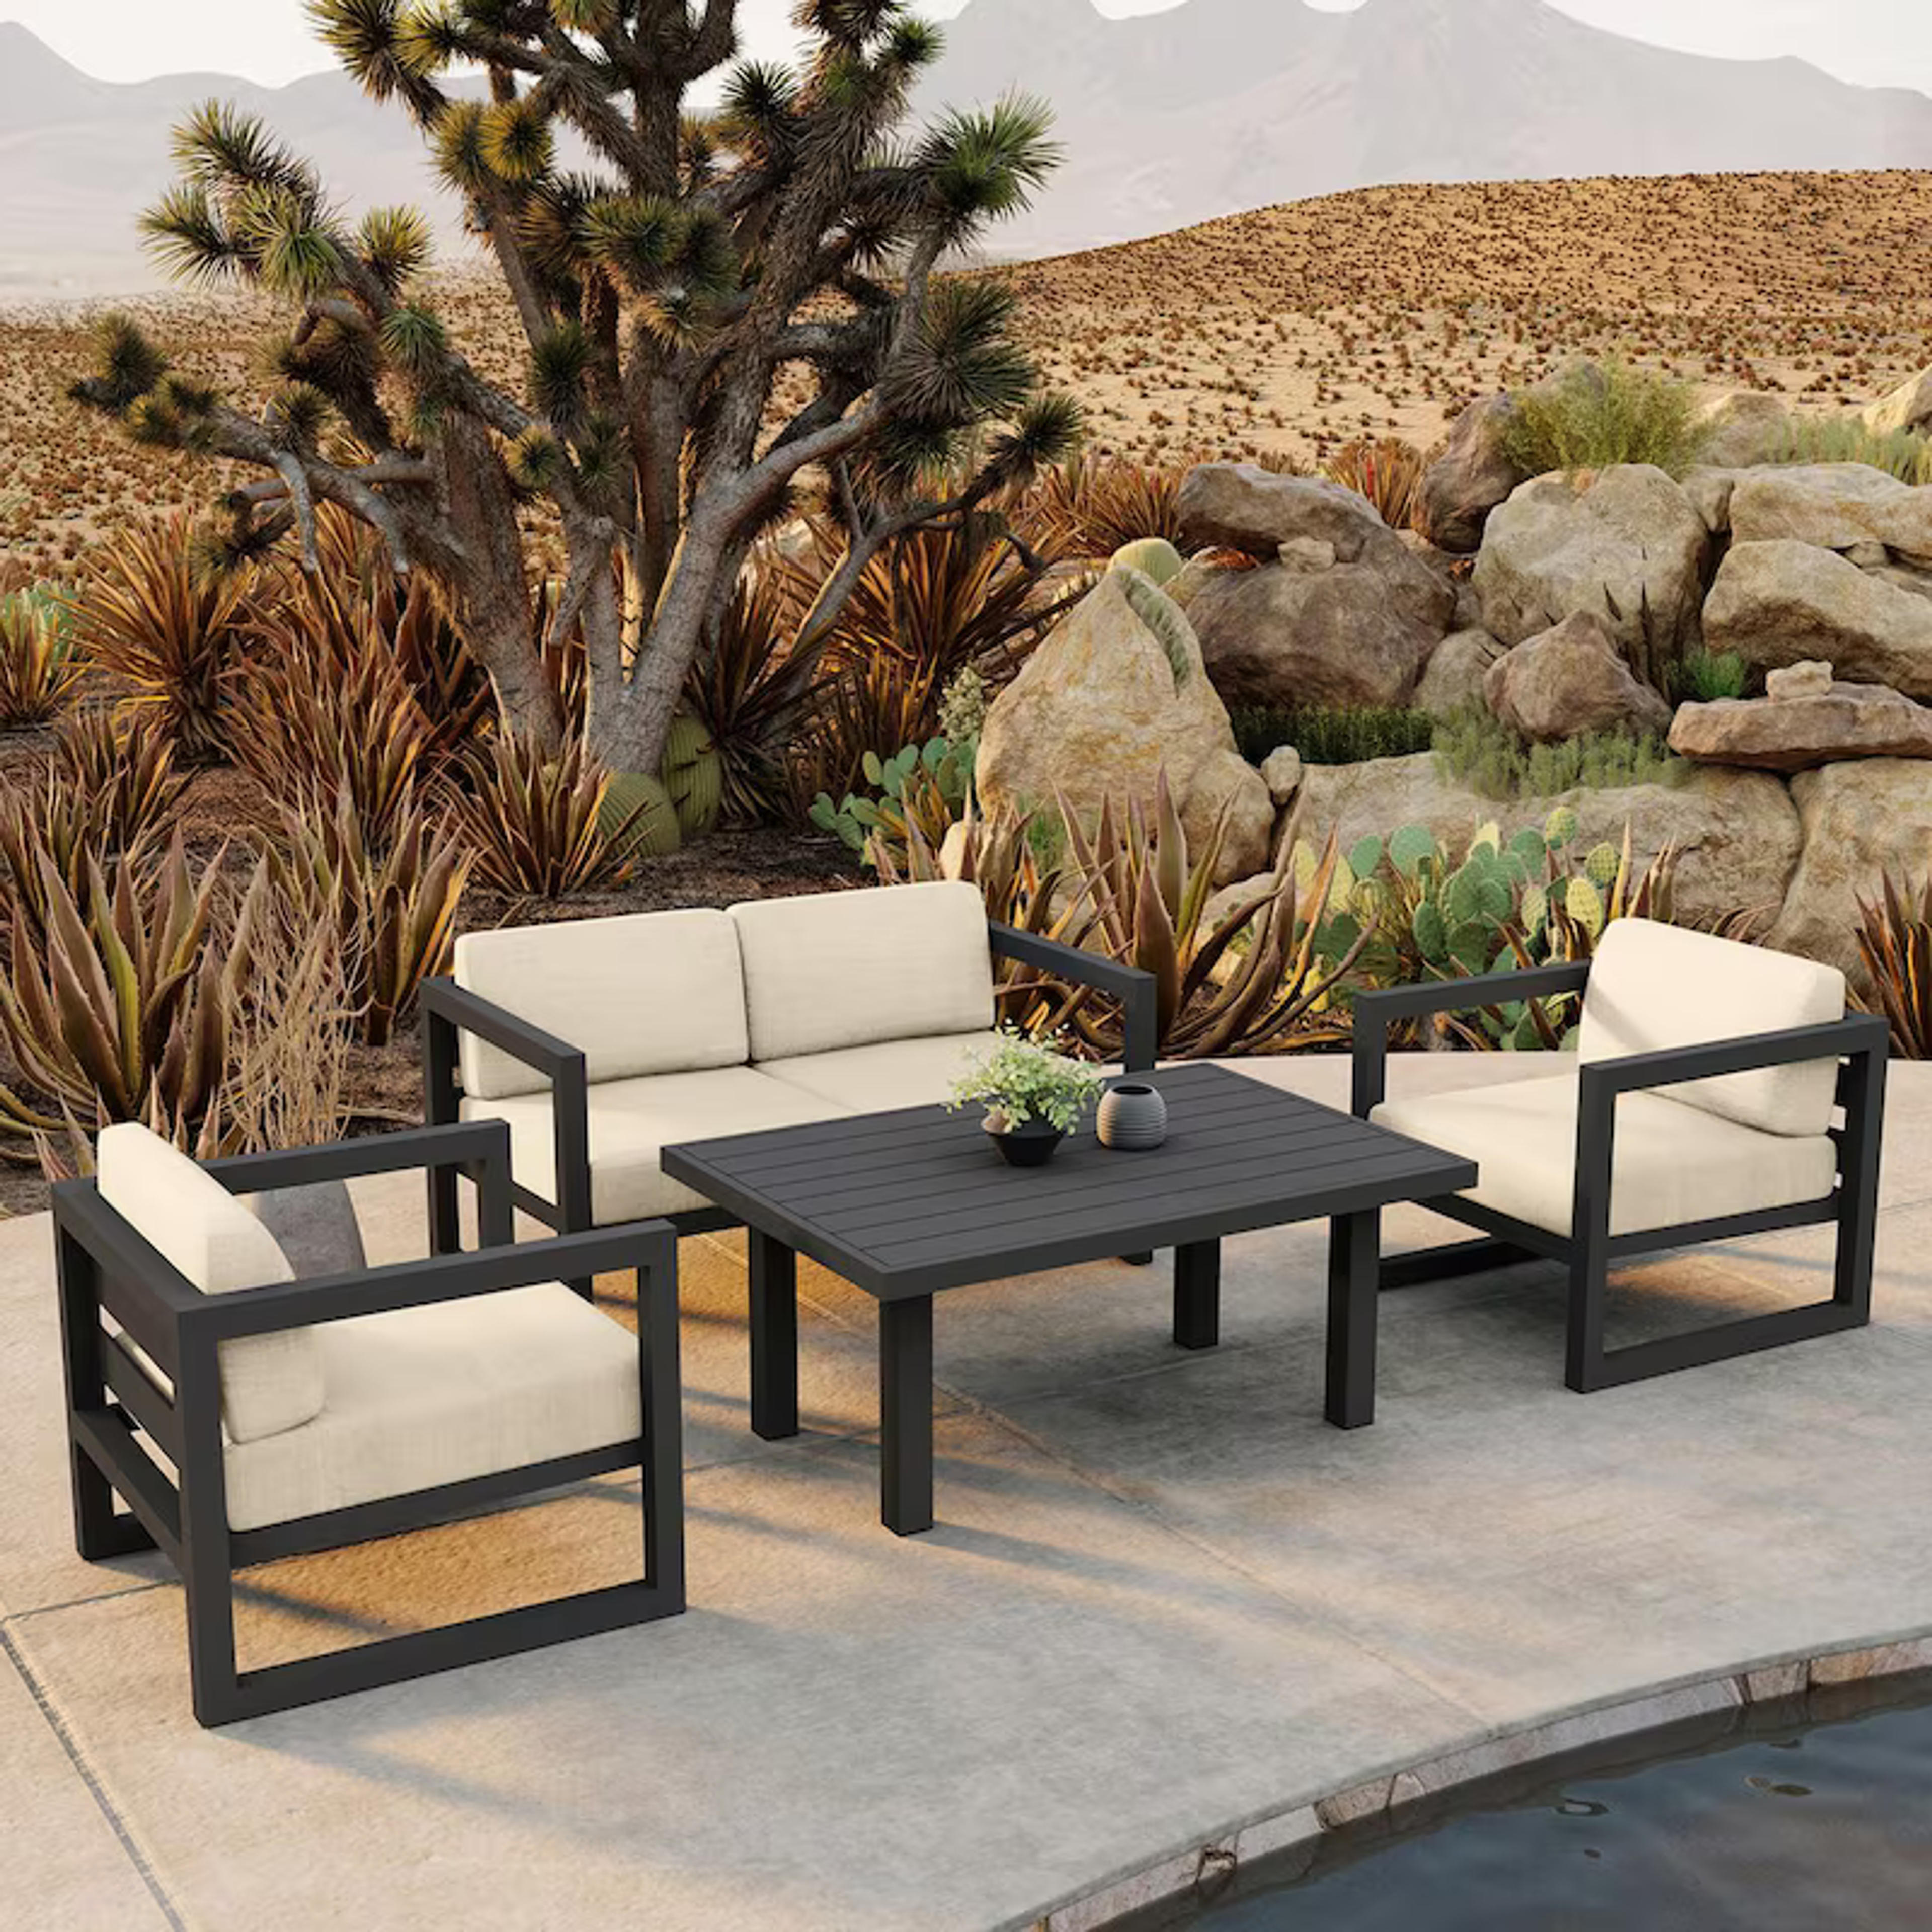 Misty Cove 4 Pc Aluminum Loveseat Set in Slate W/ Canvas Flax Cushions By Lakeview : BBQGuys